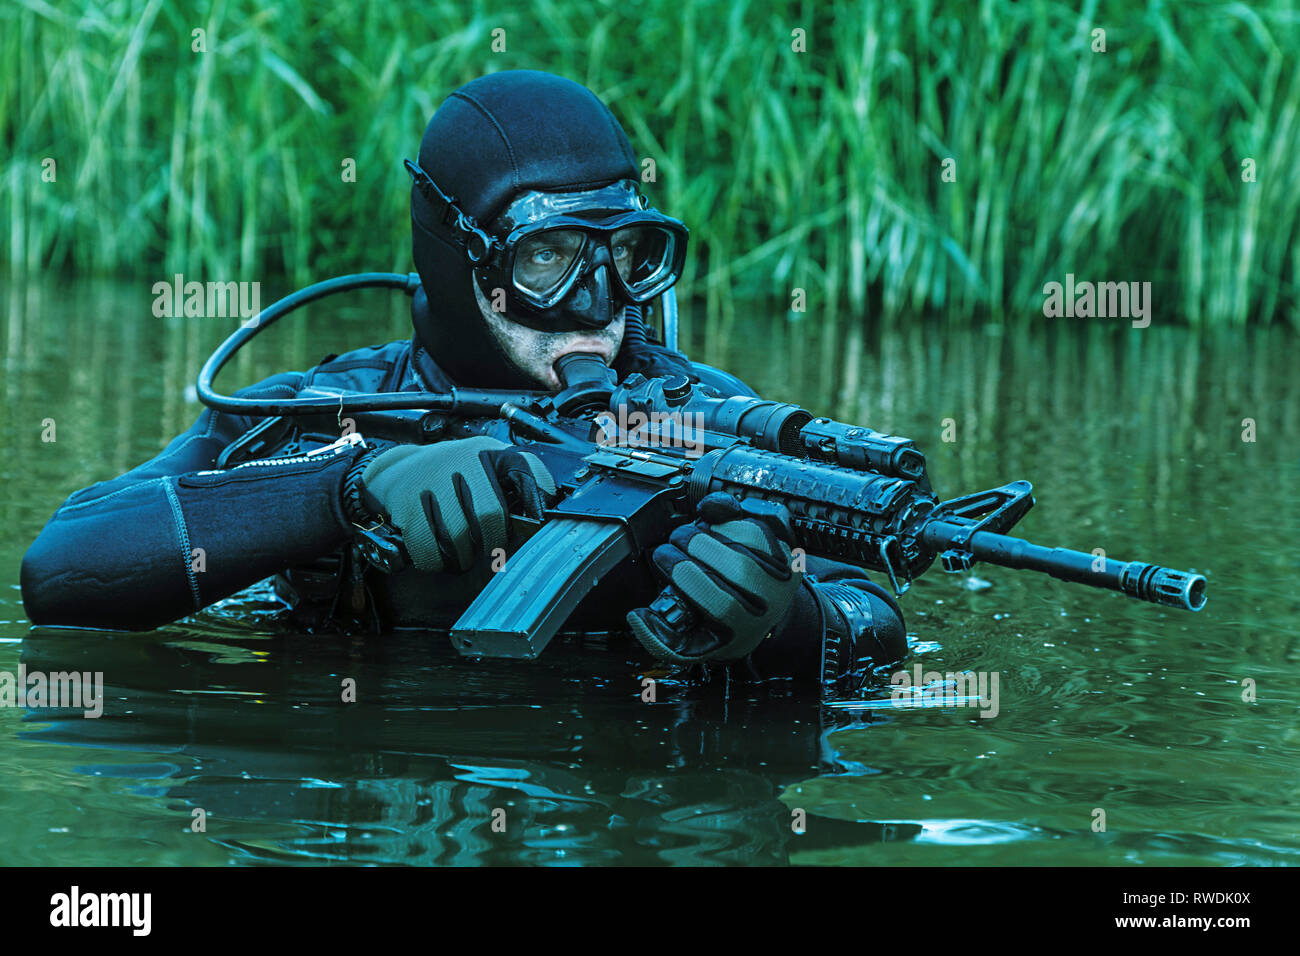 Frogman with complete diving gear and weapons in the water. Stock Photo